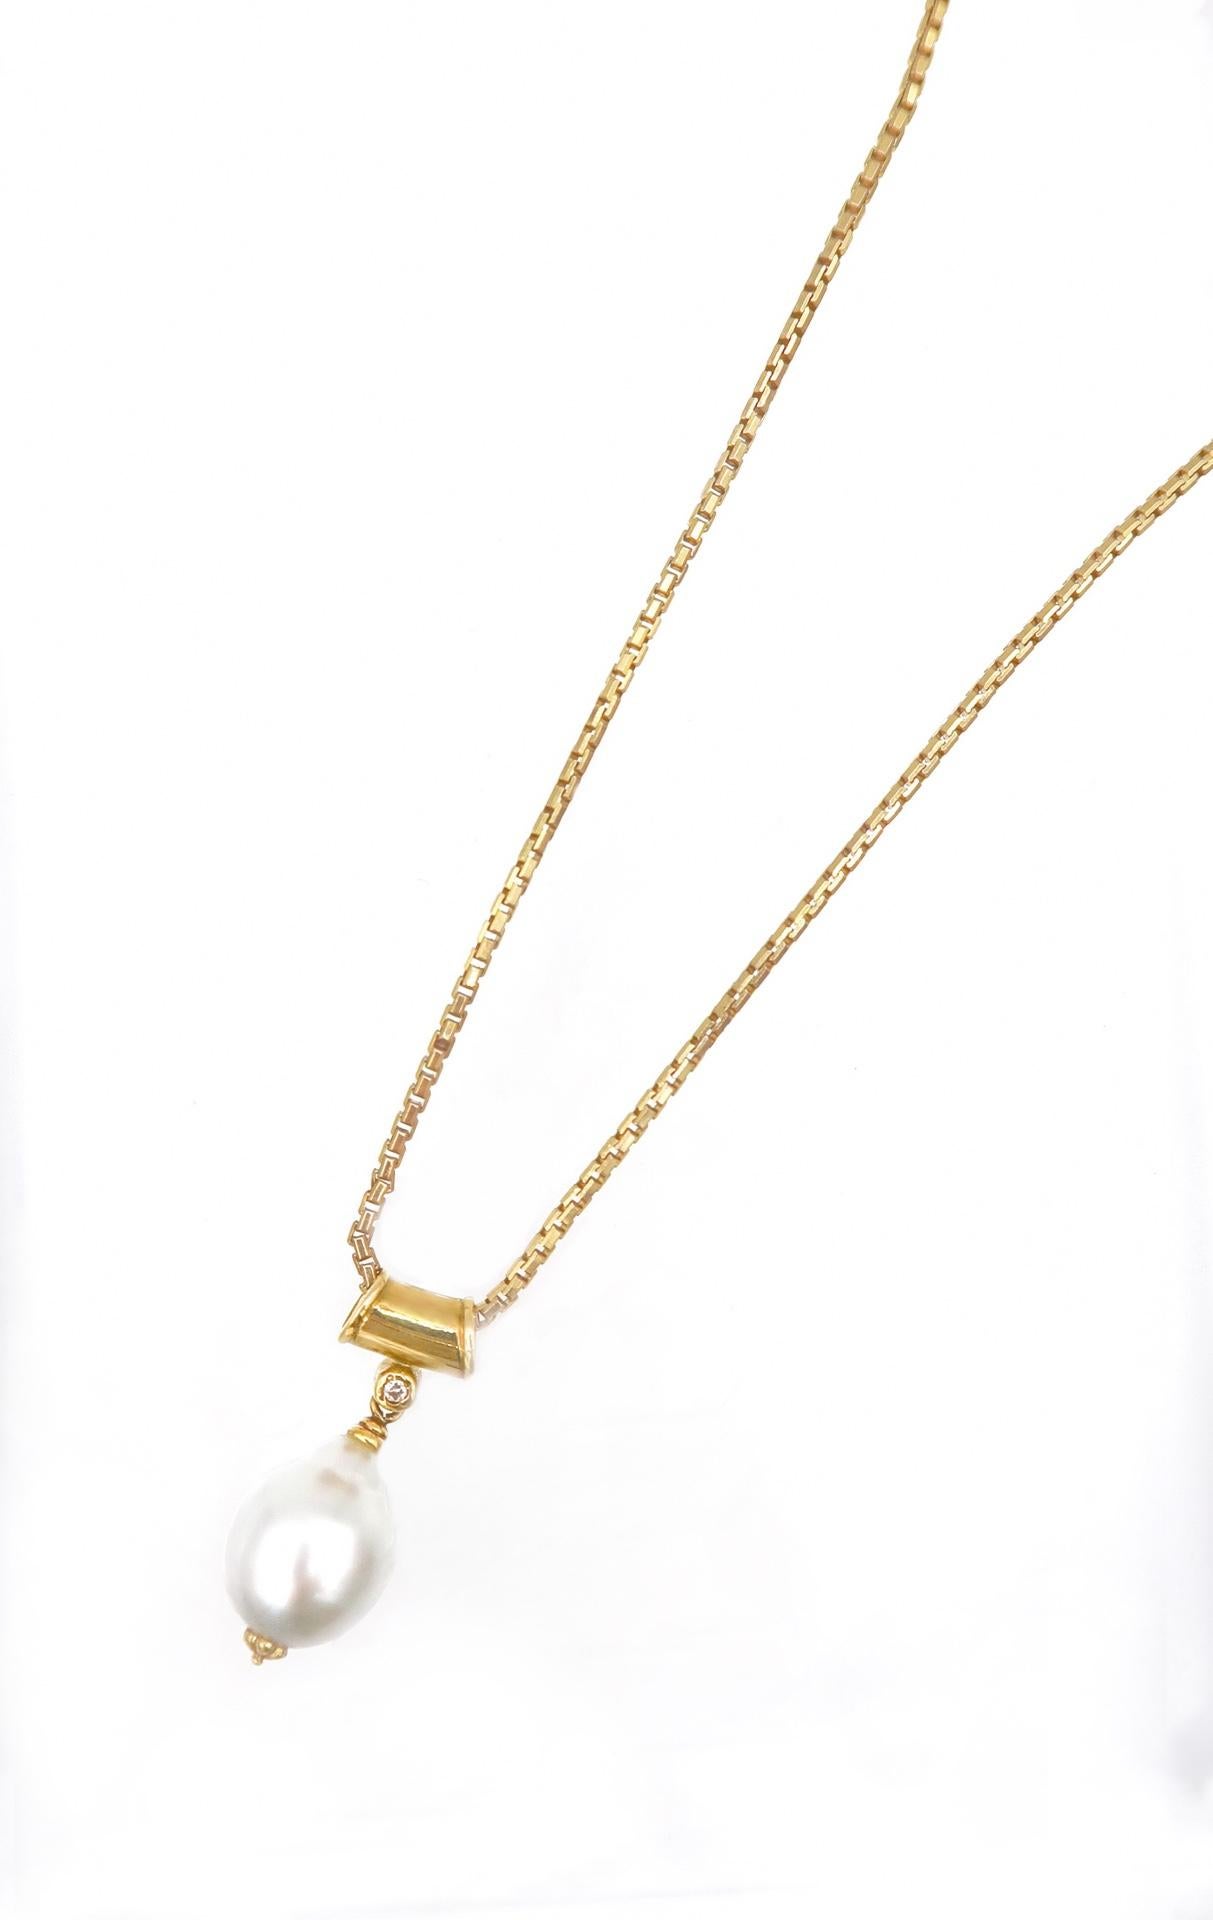 Drop Silvery White South Sea Pearl Diamond Pendant Faceted Box Chain Necklace in 18K Yellow Gold

Pendant
Gold: 18K Yellow Gold, 1.6 g
South Sea Pearl: Silvery White, 11.5 mm x 13.5 mm
Diamond: 0.05 ct

Necklace
Gold: 18K Yellow Gold, 6.0 g
Length: